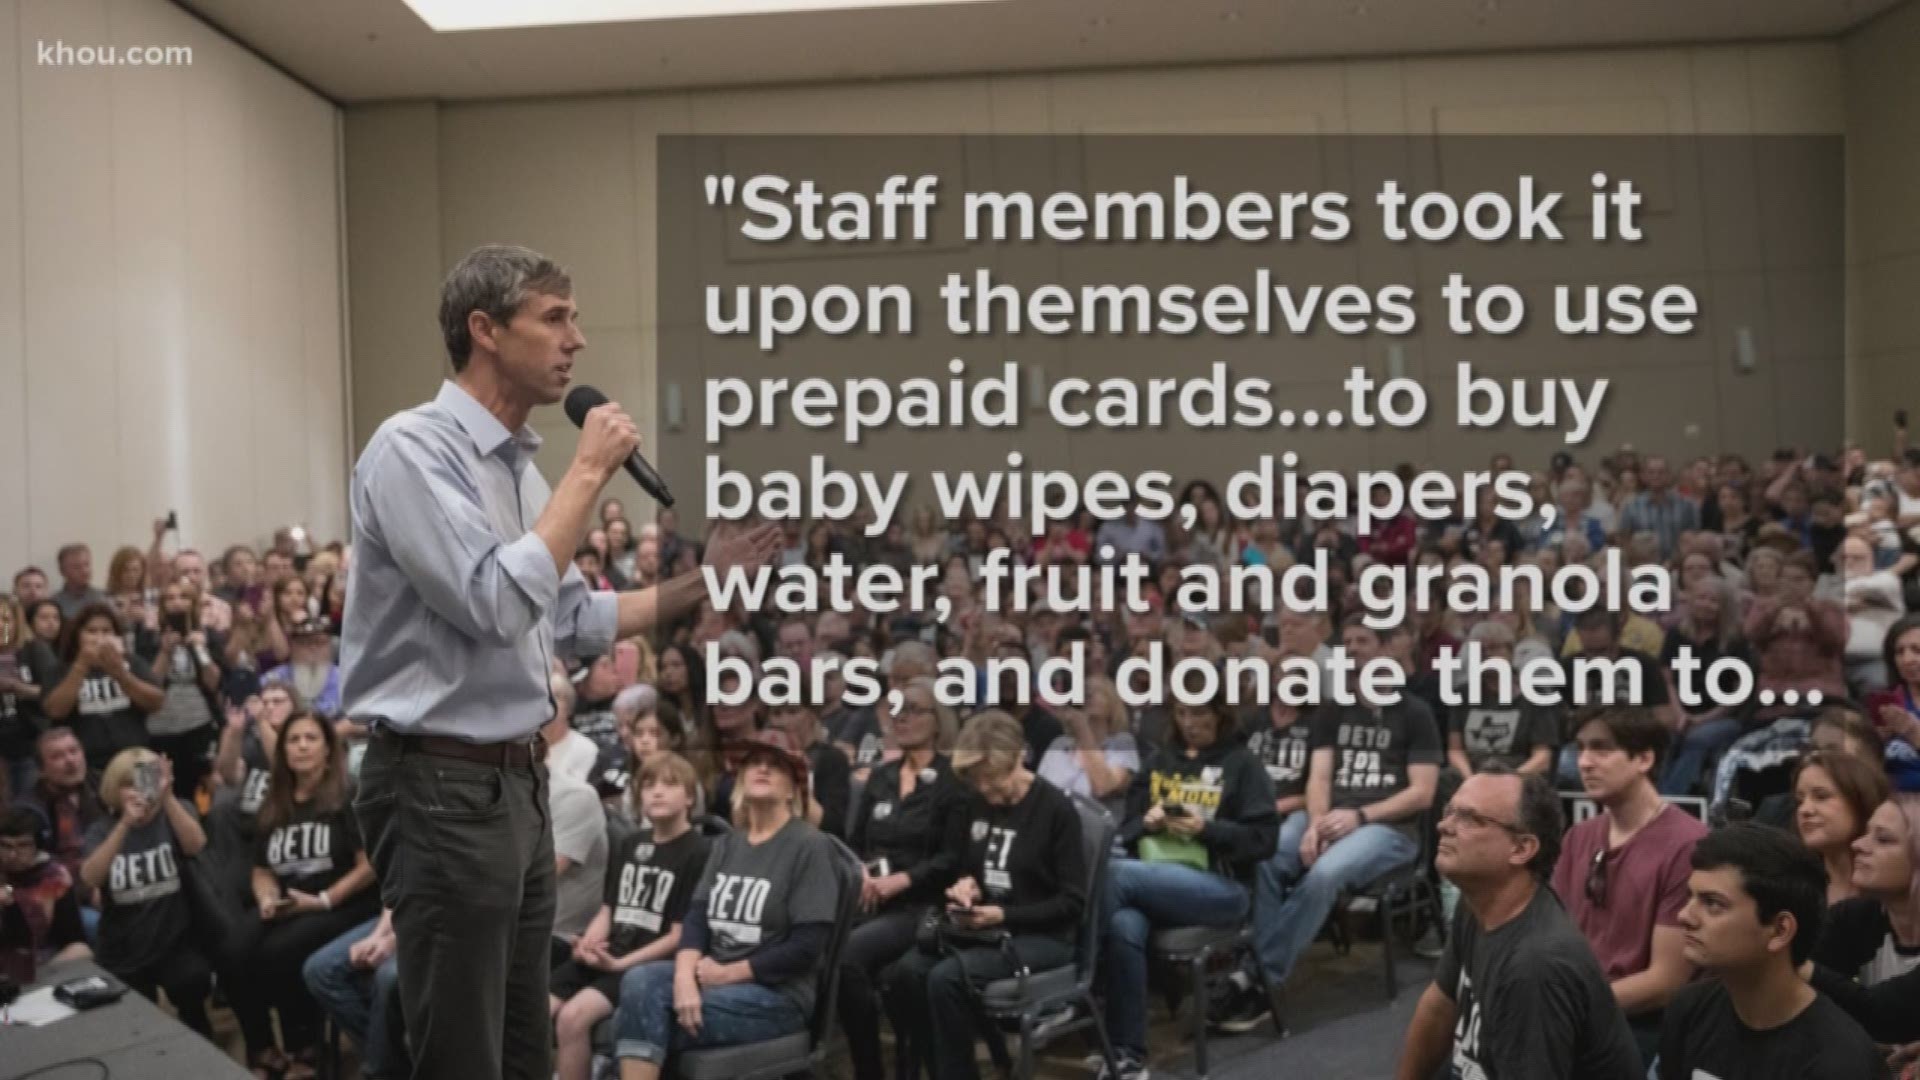 The Beto O'Rourke campaign is responding to an undercover video which appears to show his staffers using campaign funds to buy Honduran migrants supplies.